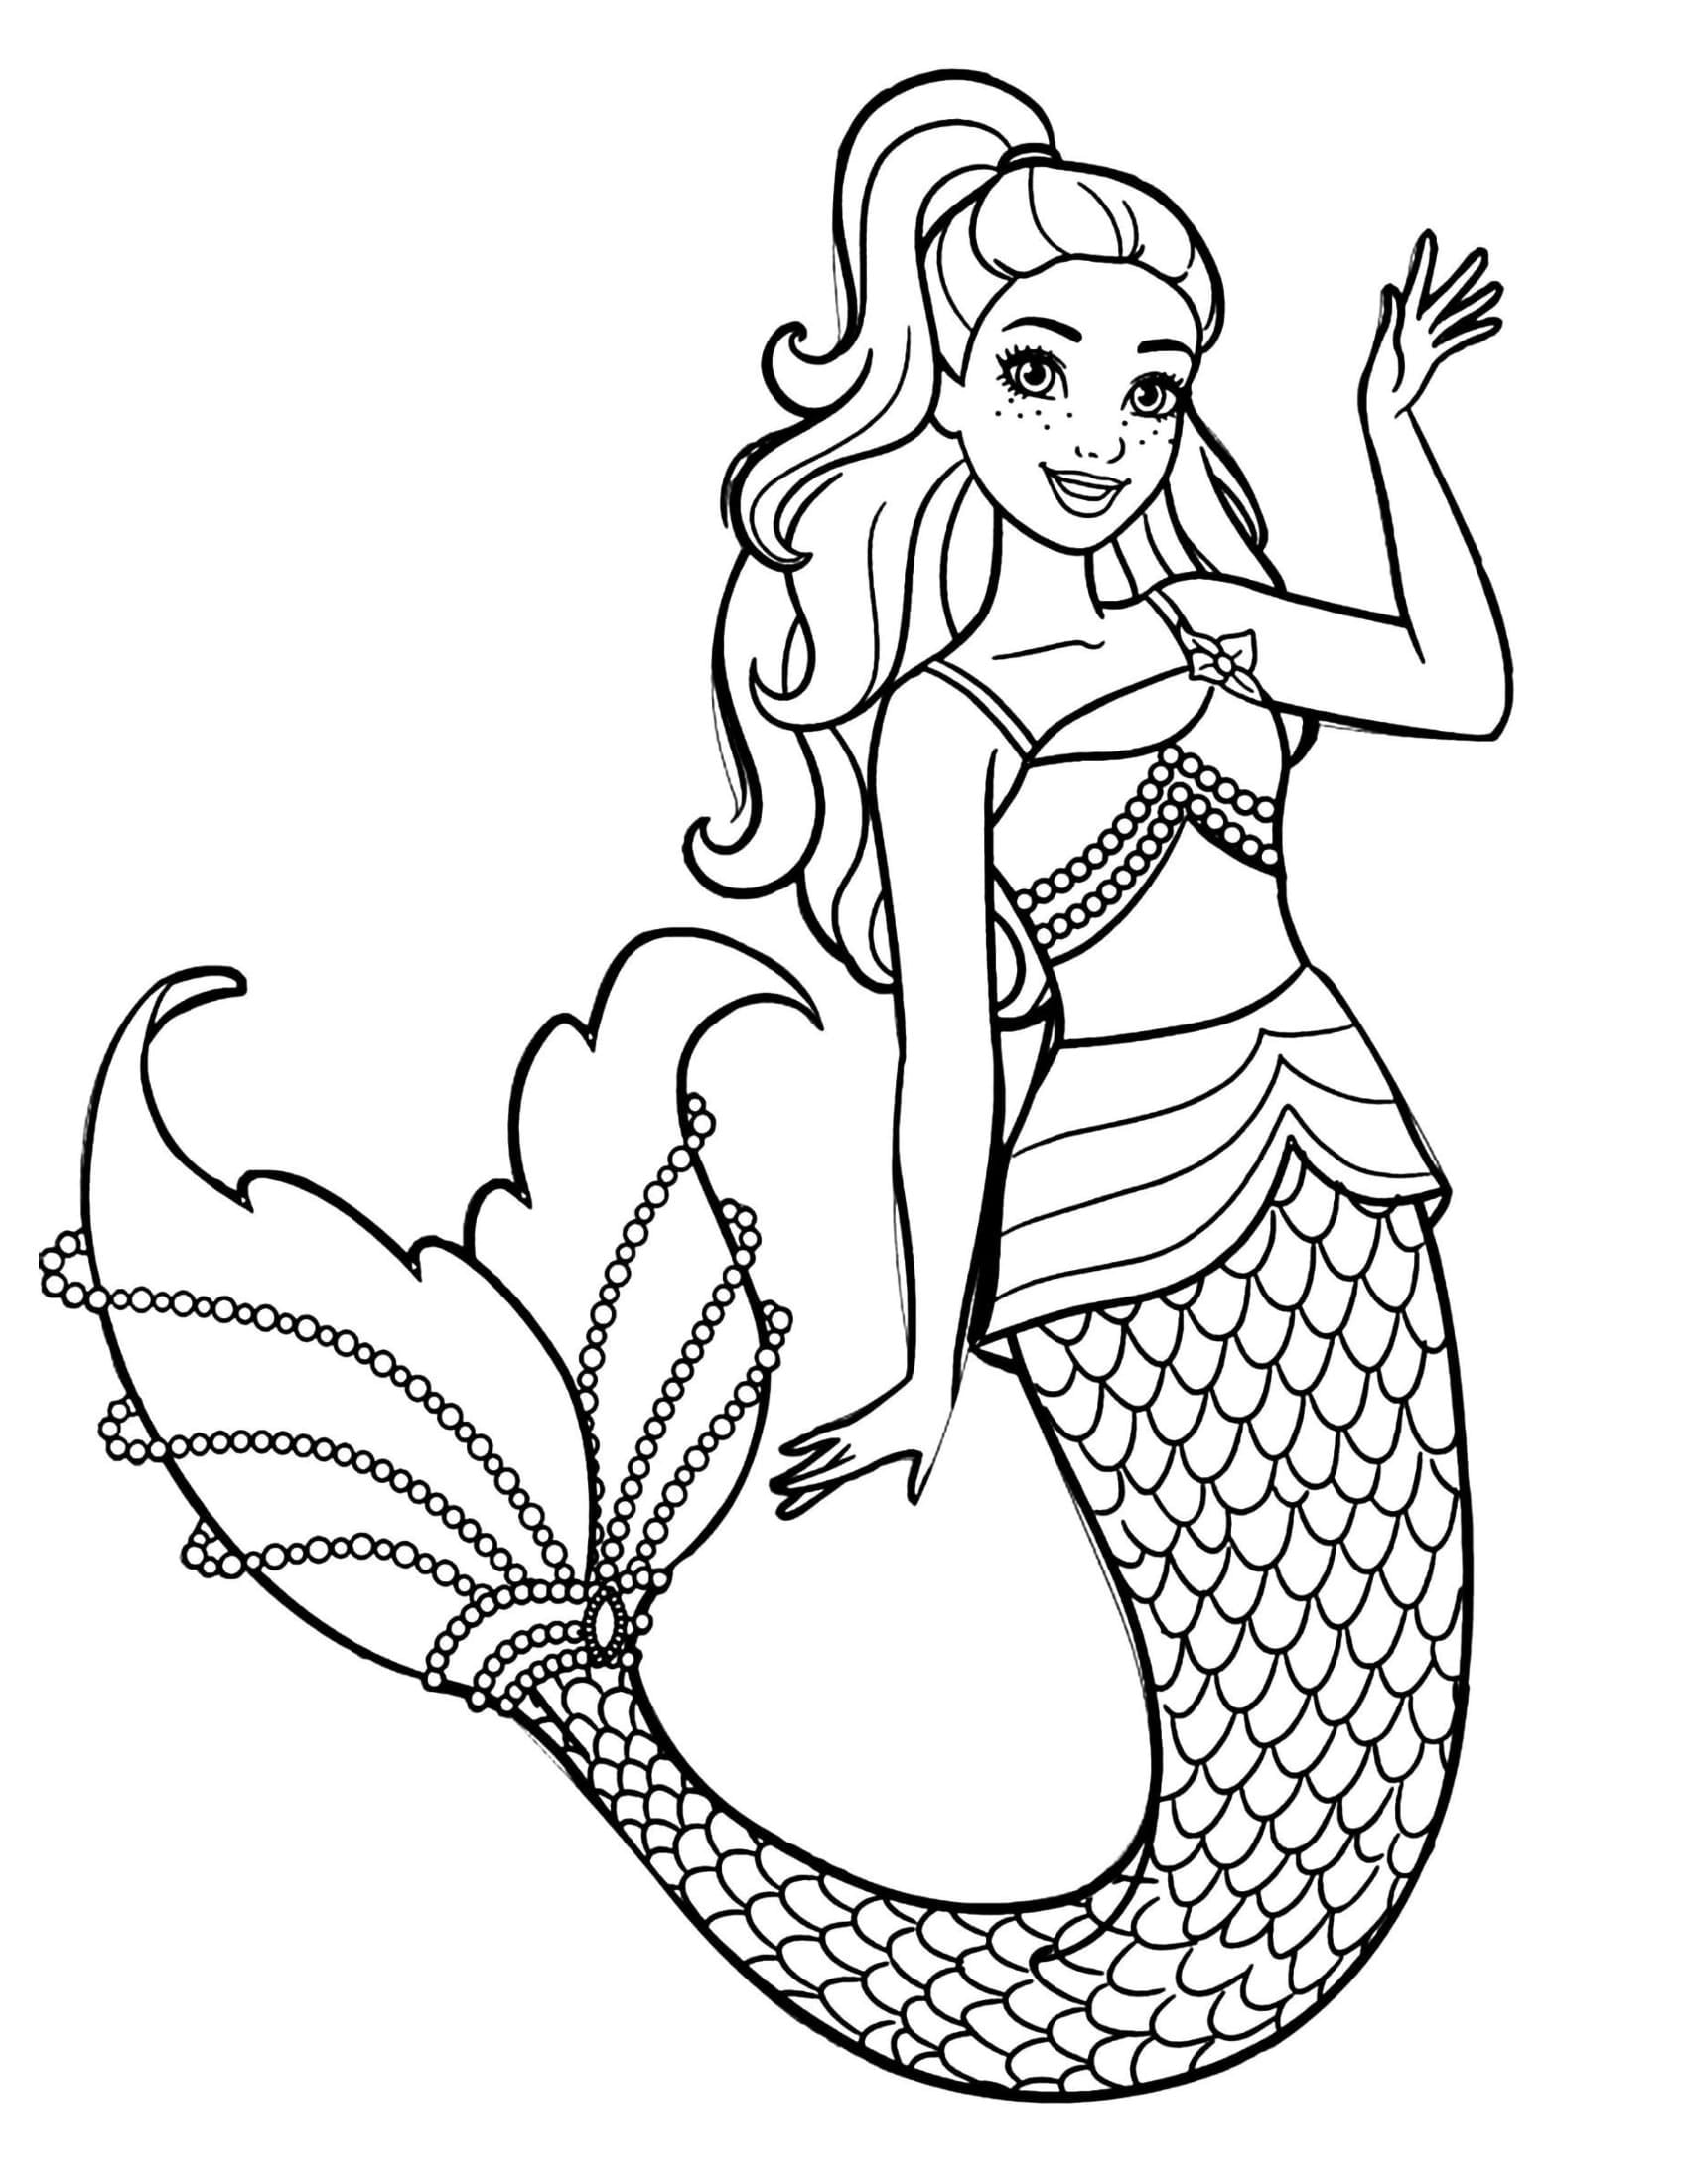 Barbie Colouring/Coloring Pages children's and adults   Etsy.de